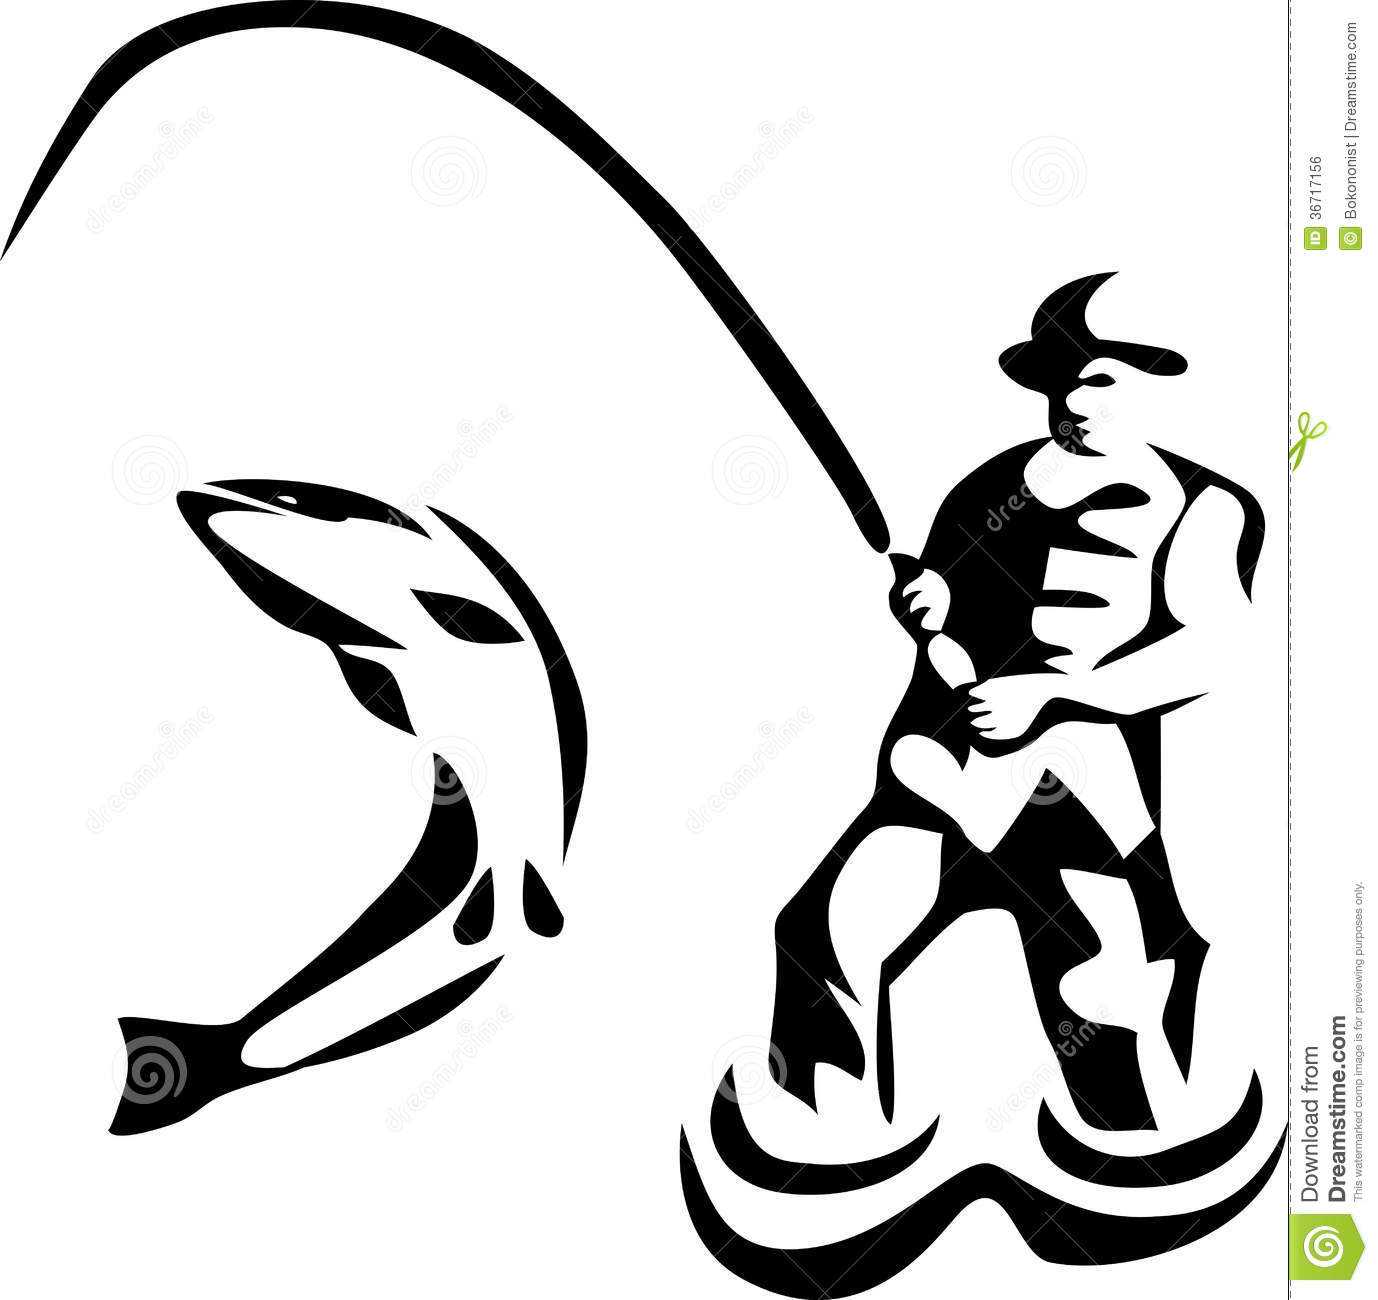 black and white fishing clip art - Clip Art Library